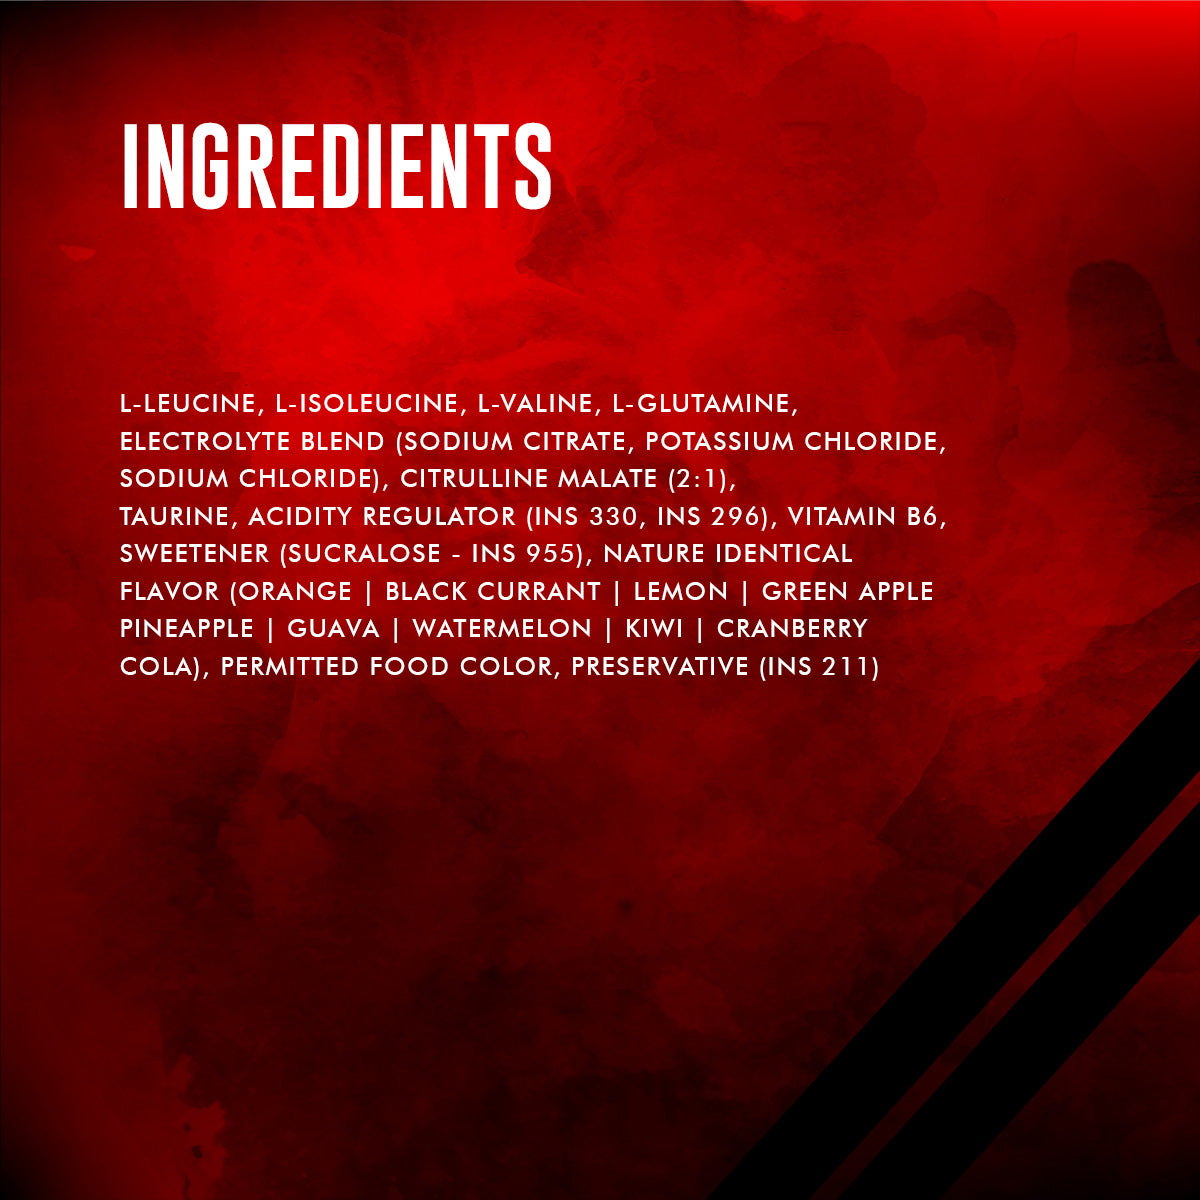 Ingredients of Ripped BCAA